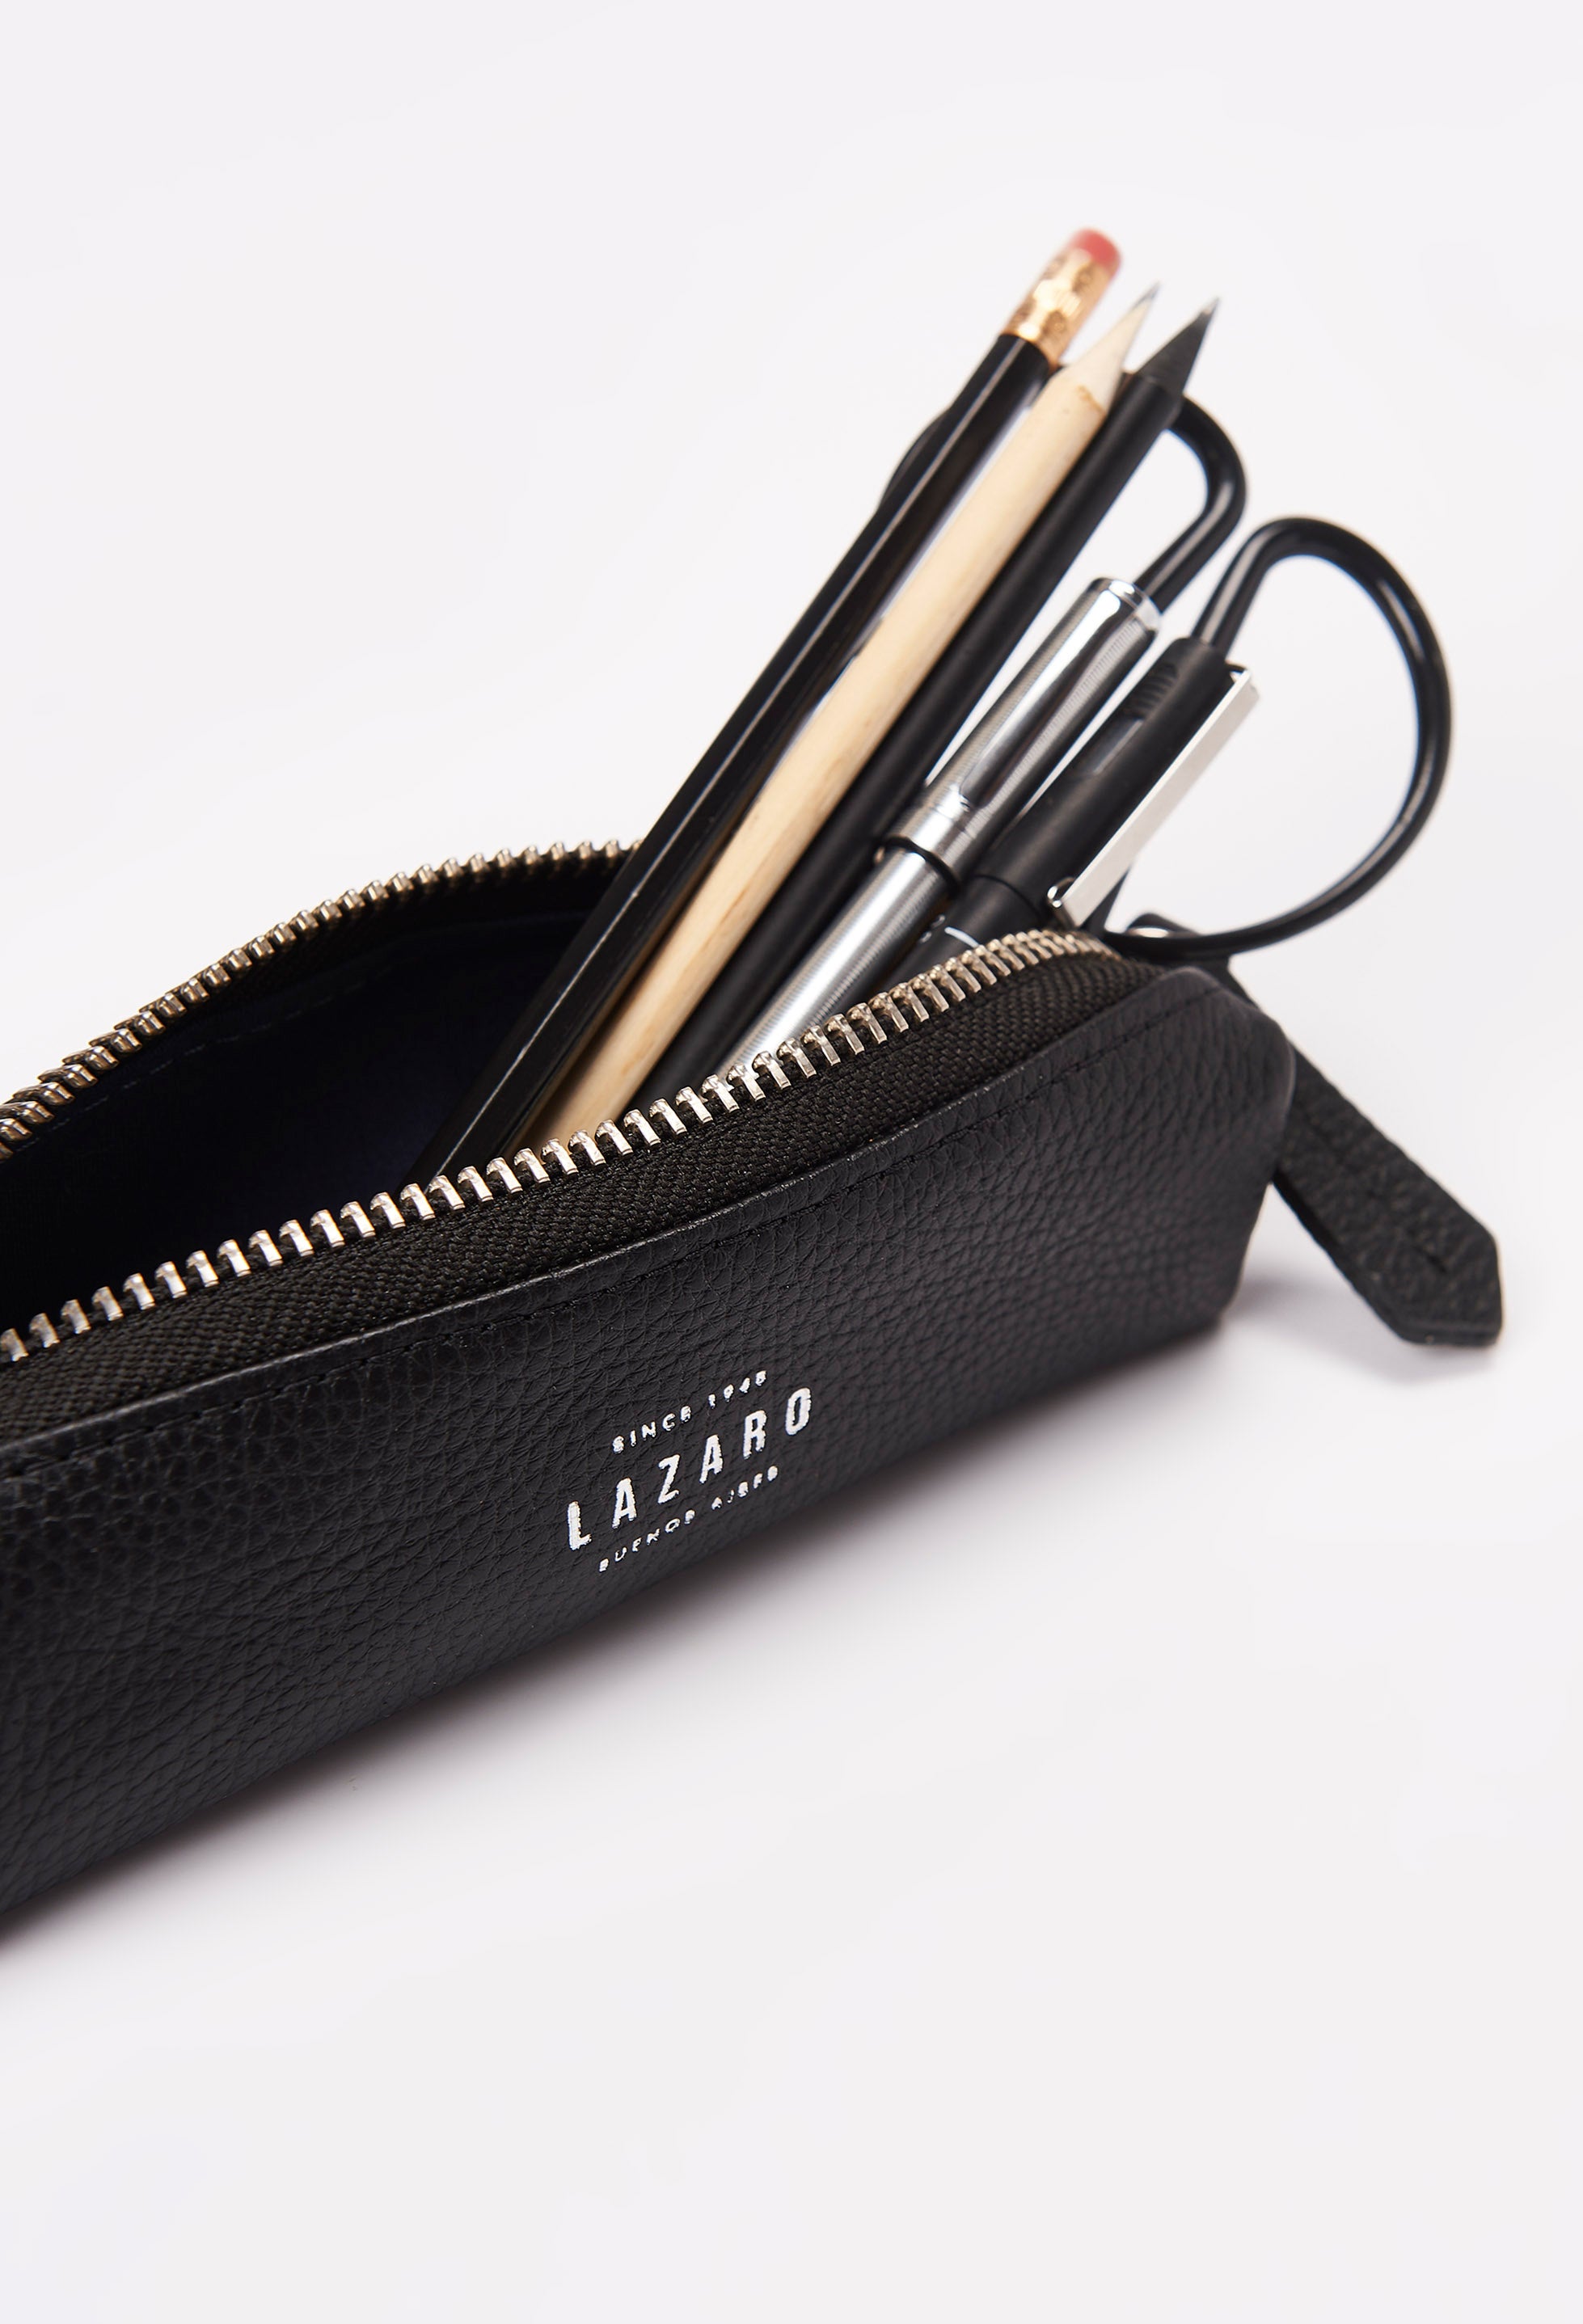 Interior of a Black Leather Pencil Case packed with pens, pencils and a scissor.